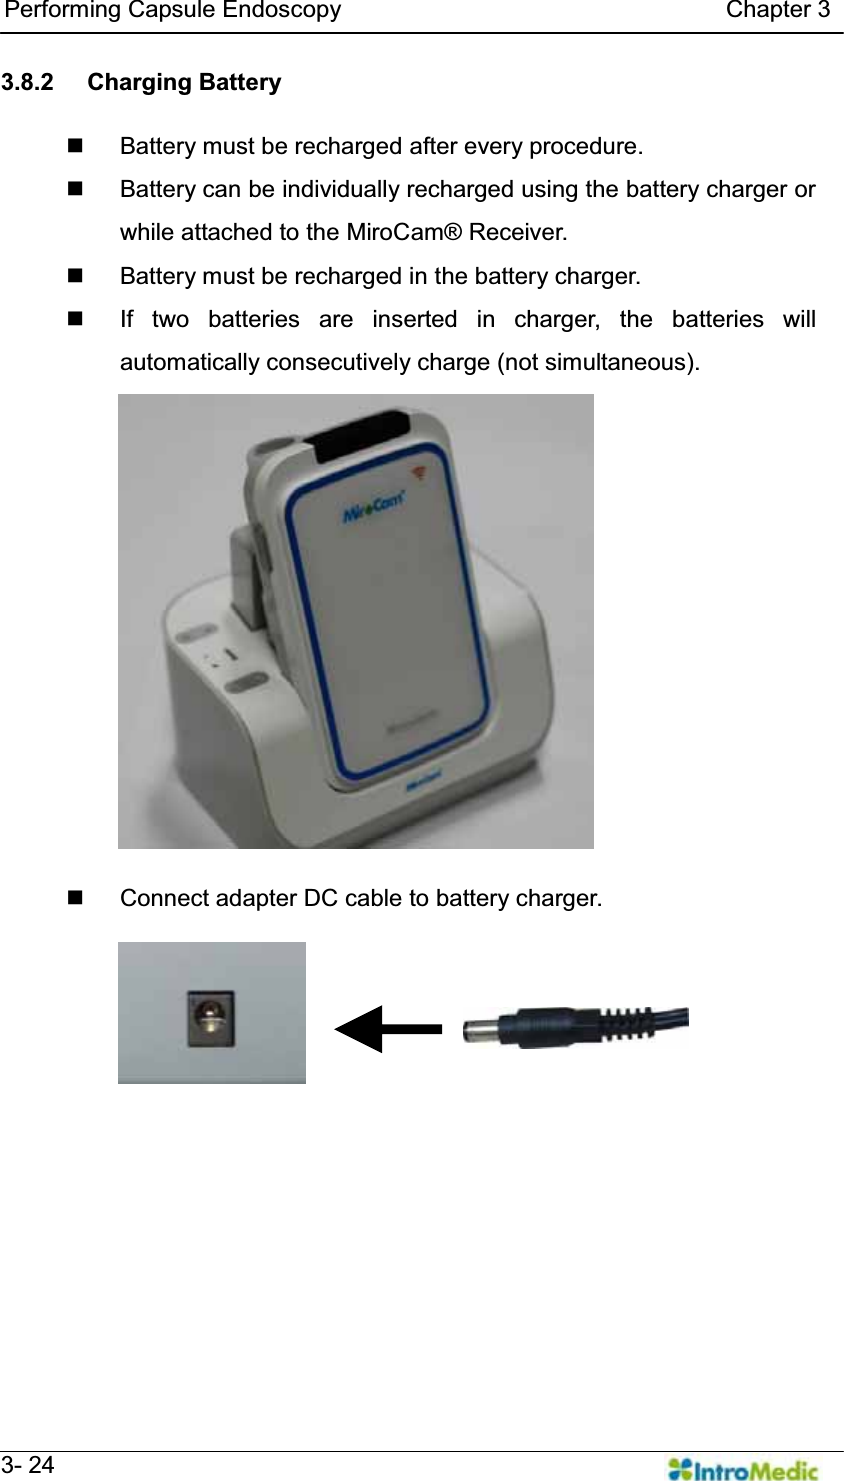   Performing Capsule Endoscopy                                Chapter 3   3- 24 3.8.2 Charging Battery    Battery must be recharged after every procedure.   Battery can be individually recharged using the battery charger or while attached to the MiroCam® Receiver.   Battery must be recharged in the battery charger.   If two batteries are inserted in charger, the batteries will automatically consecutively charge (not simultaneous).      Connect adapter DC cable to battery charger.  